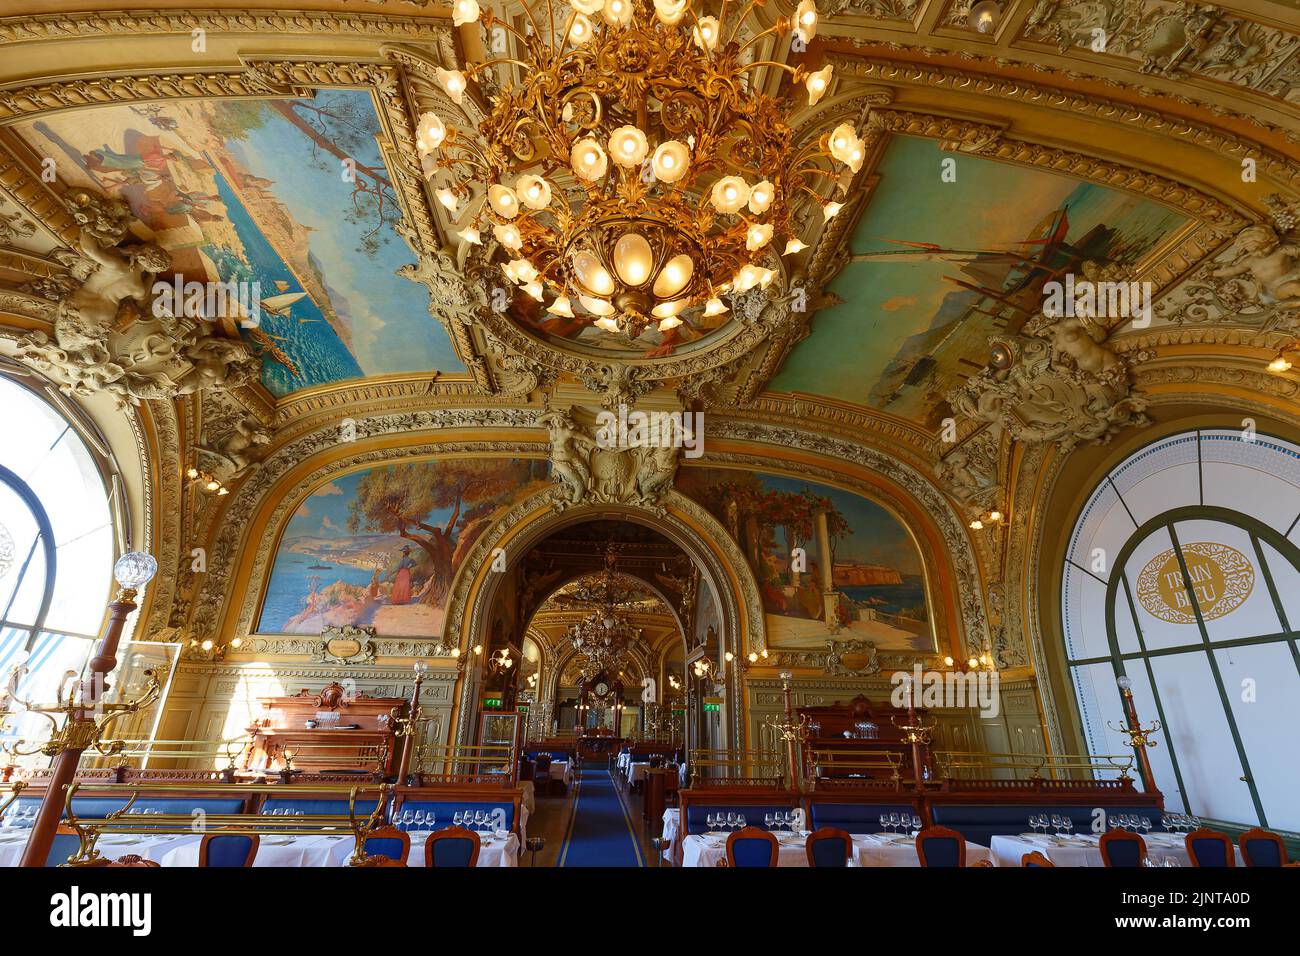 Le Train Bleu is a famous restaurant located in the hall of the Gare de Lyon railway station in Paris . Stock Photo